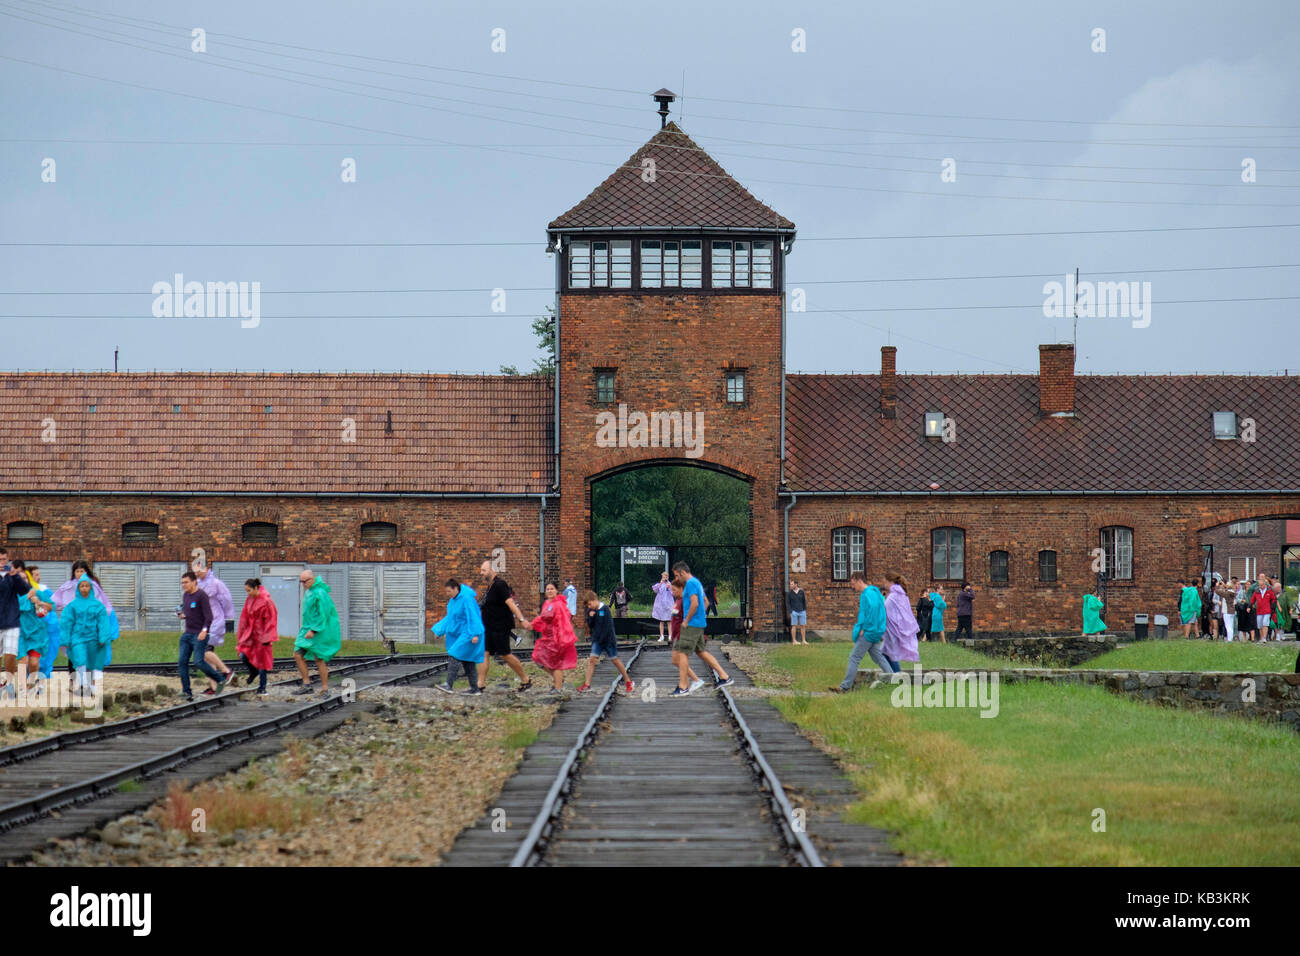 Tourists passing in front of the entrance gate to the Auschwitz II BIrkenau WWII Nazi concentration camp, Poland Stock Photo